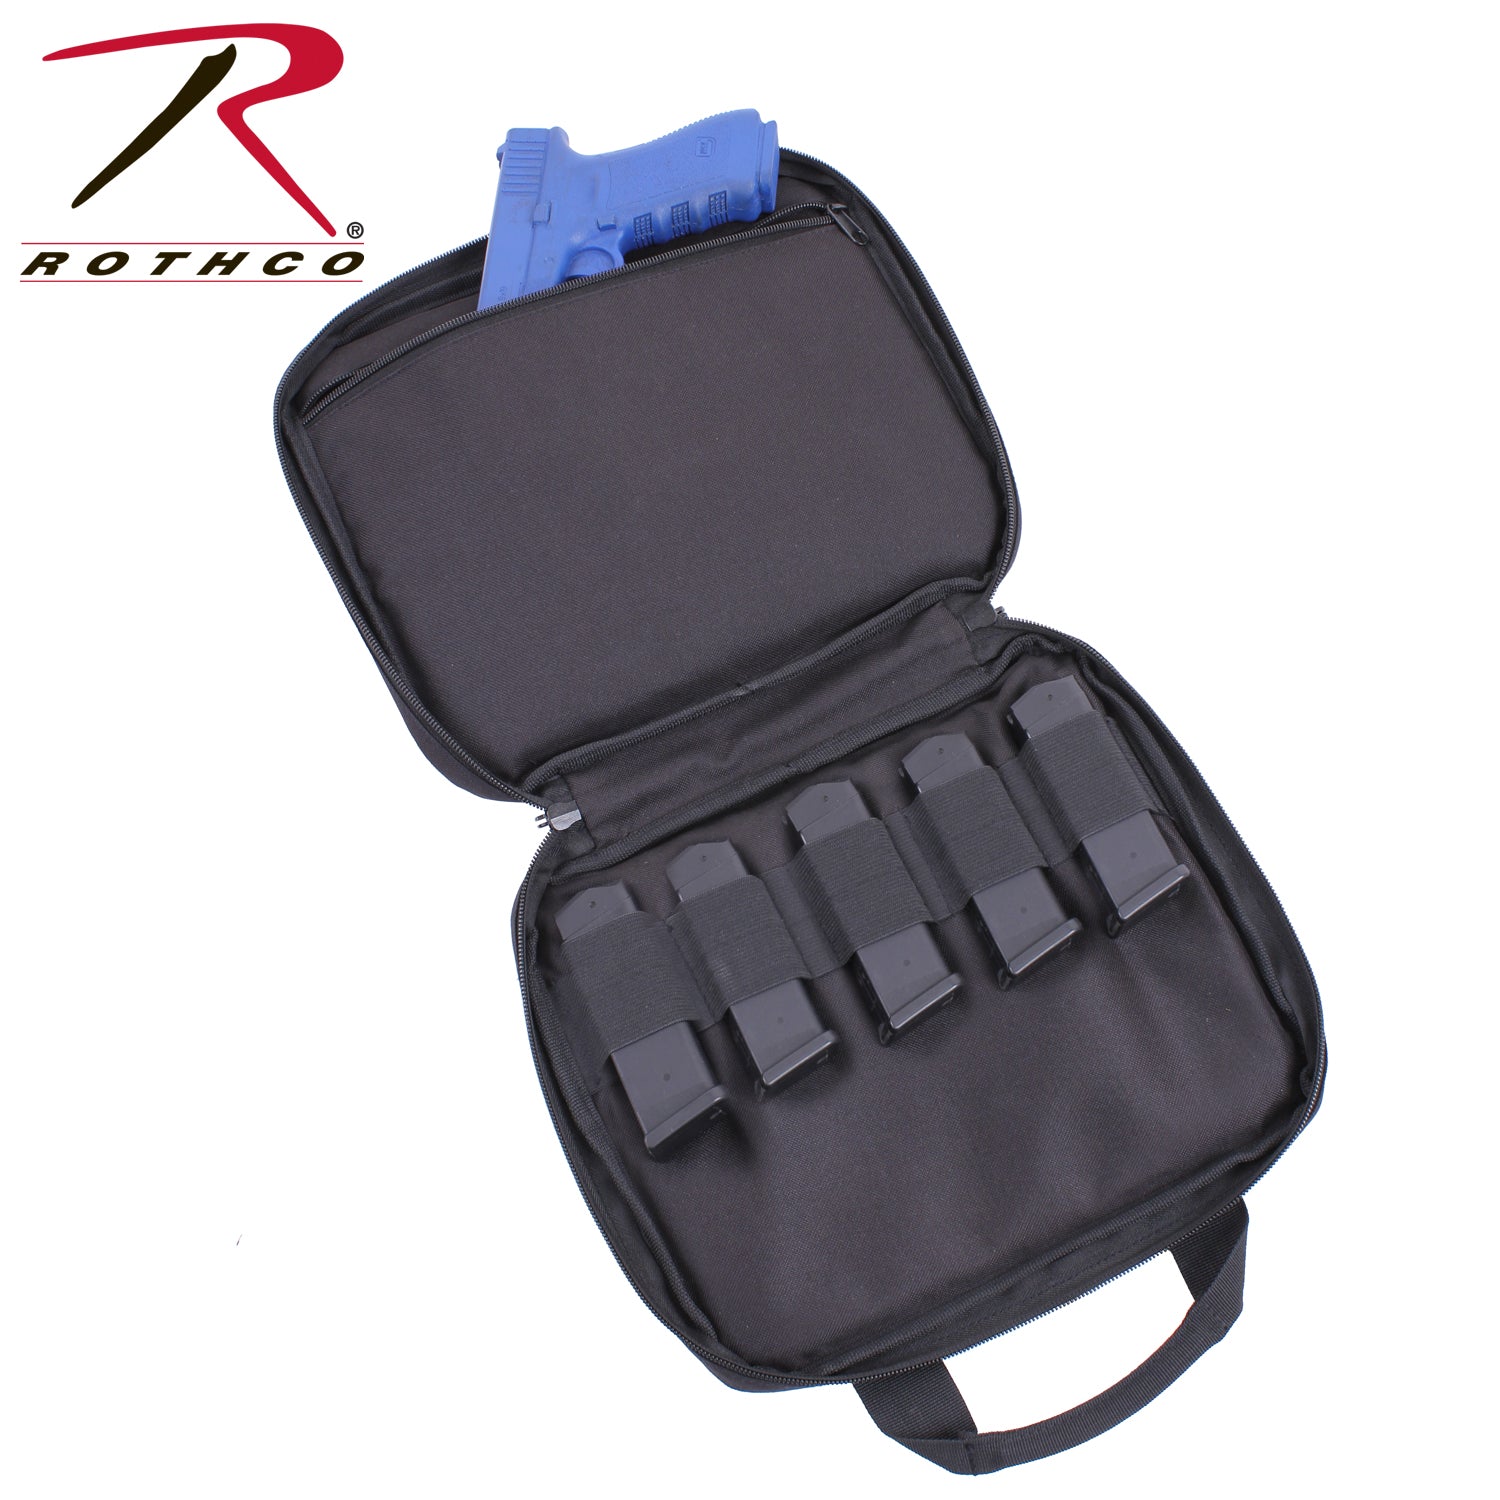 Rothco Double Pistol Carry Case - Tactical Choice Plus